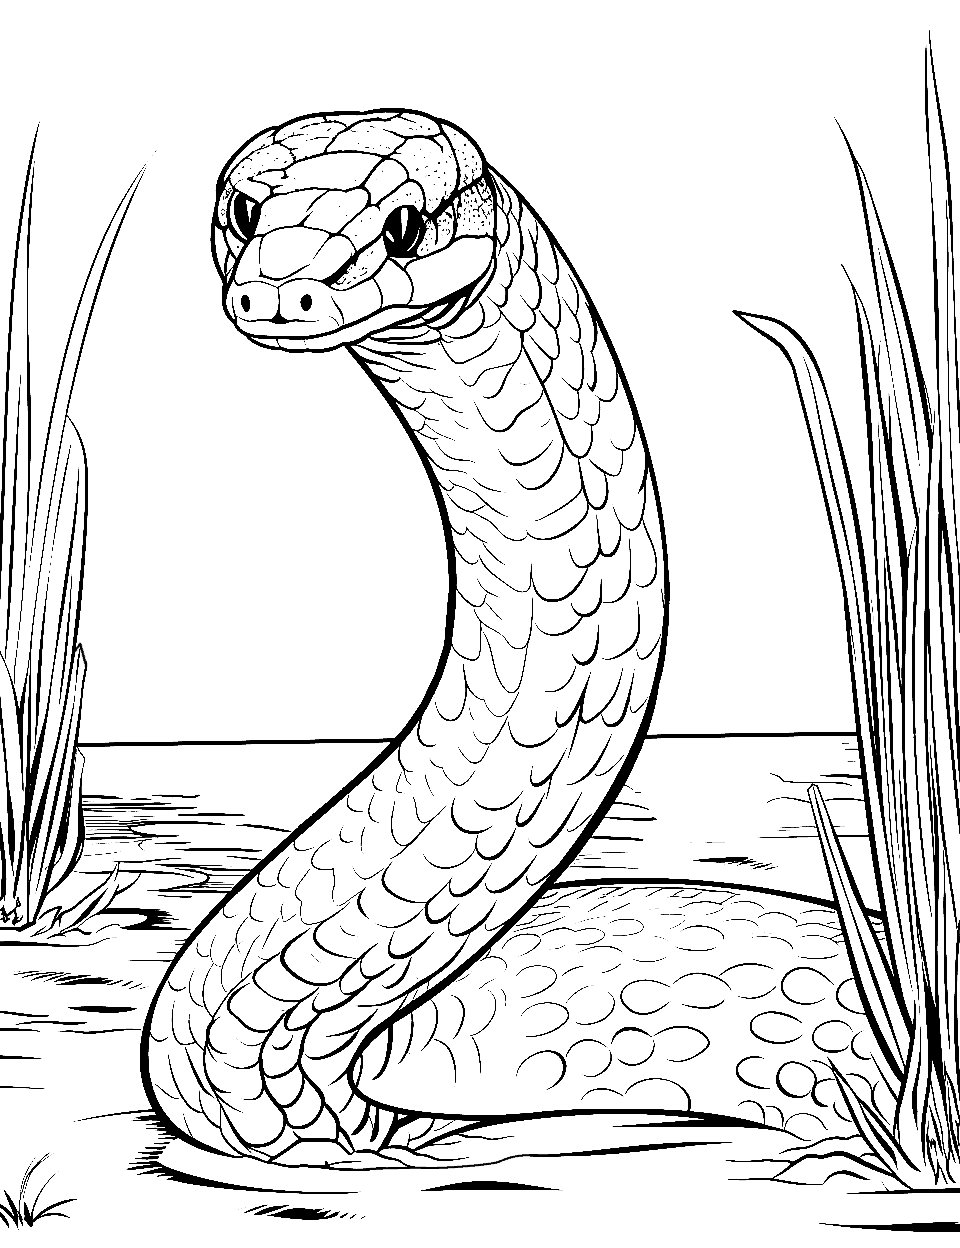 Wetland Wanderer Coloring Page - A snake swimming through a marshy wetland.